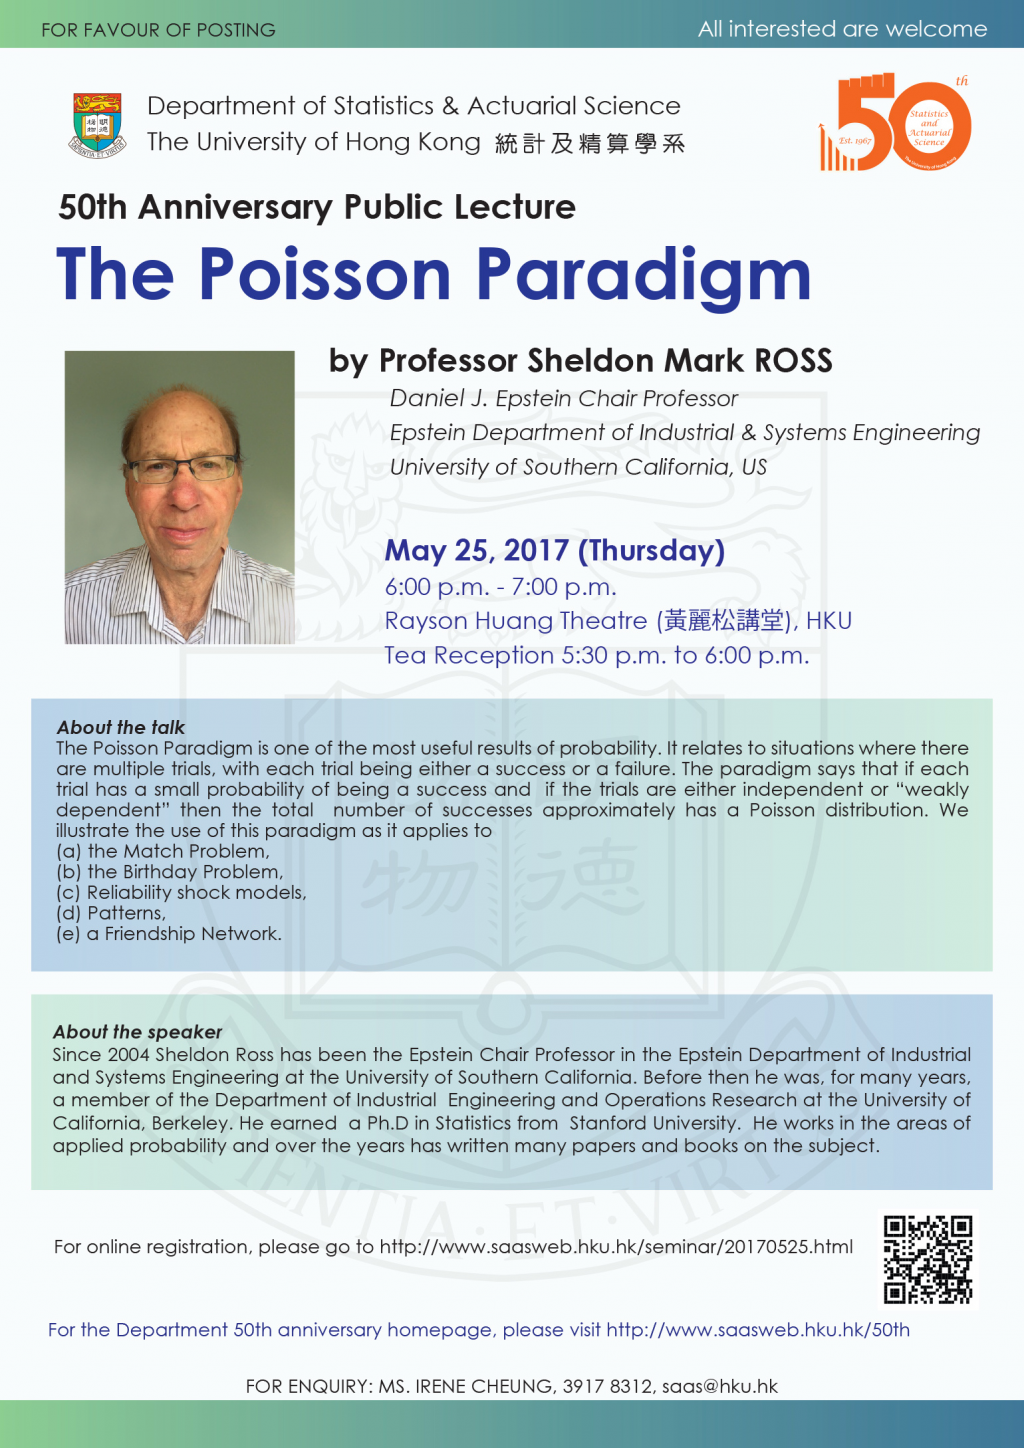 50th Anniversary Public Lecture on 'The Poisson Paradigm' by Professor Sheldon Mark ROSS on May 25, 2017